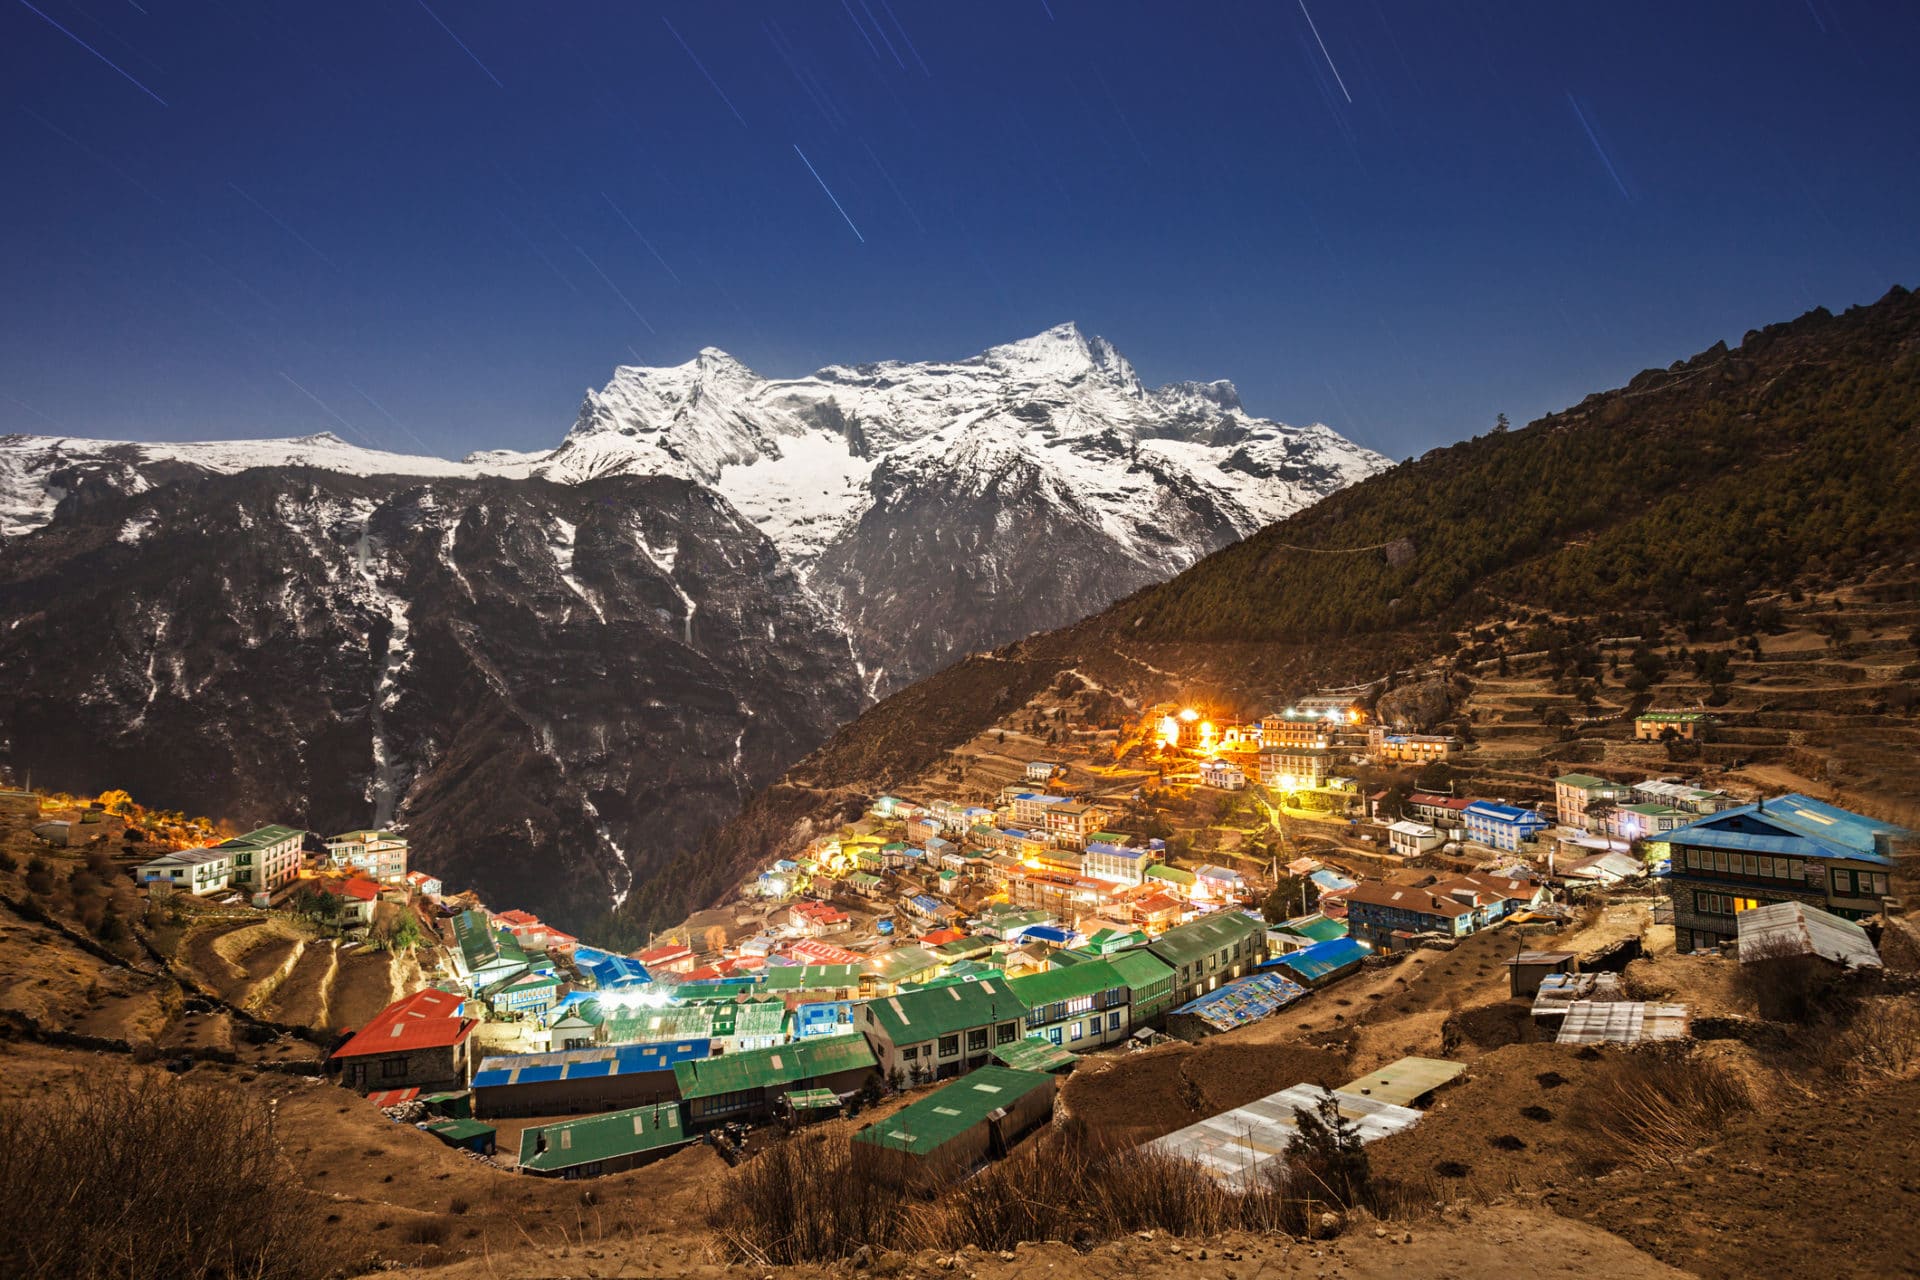 How cold is Everest Base Camp